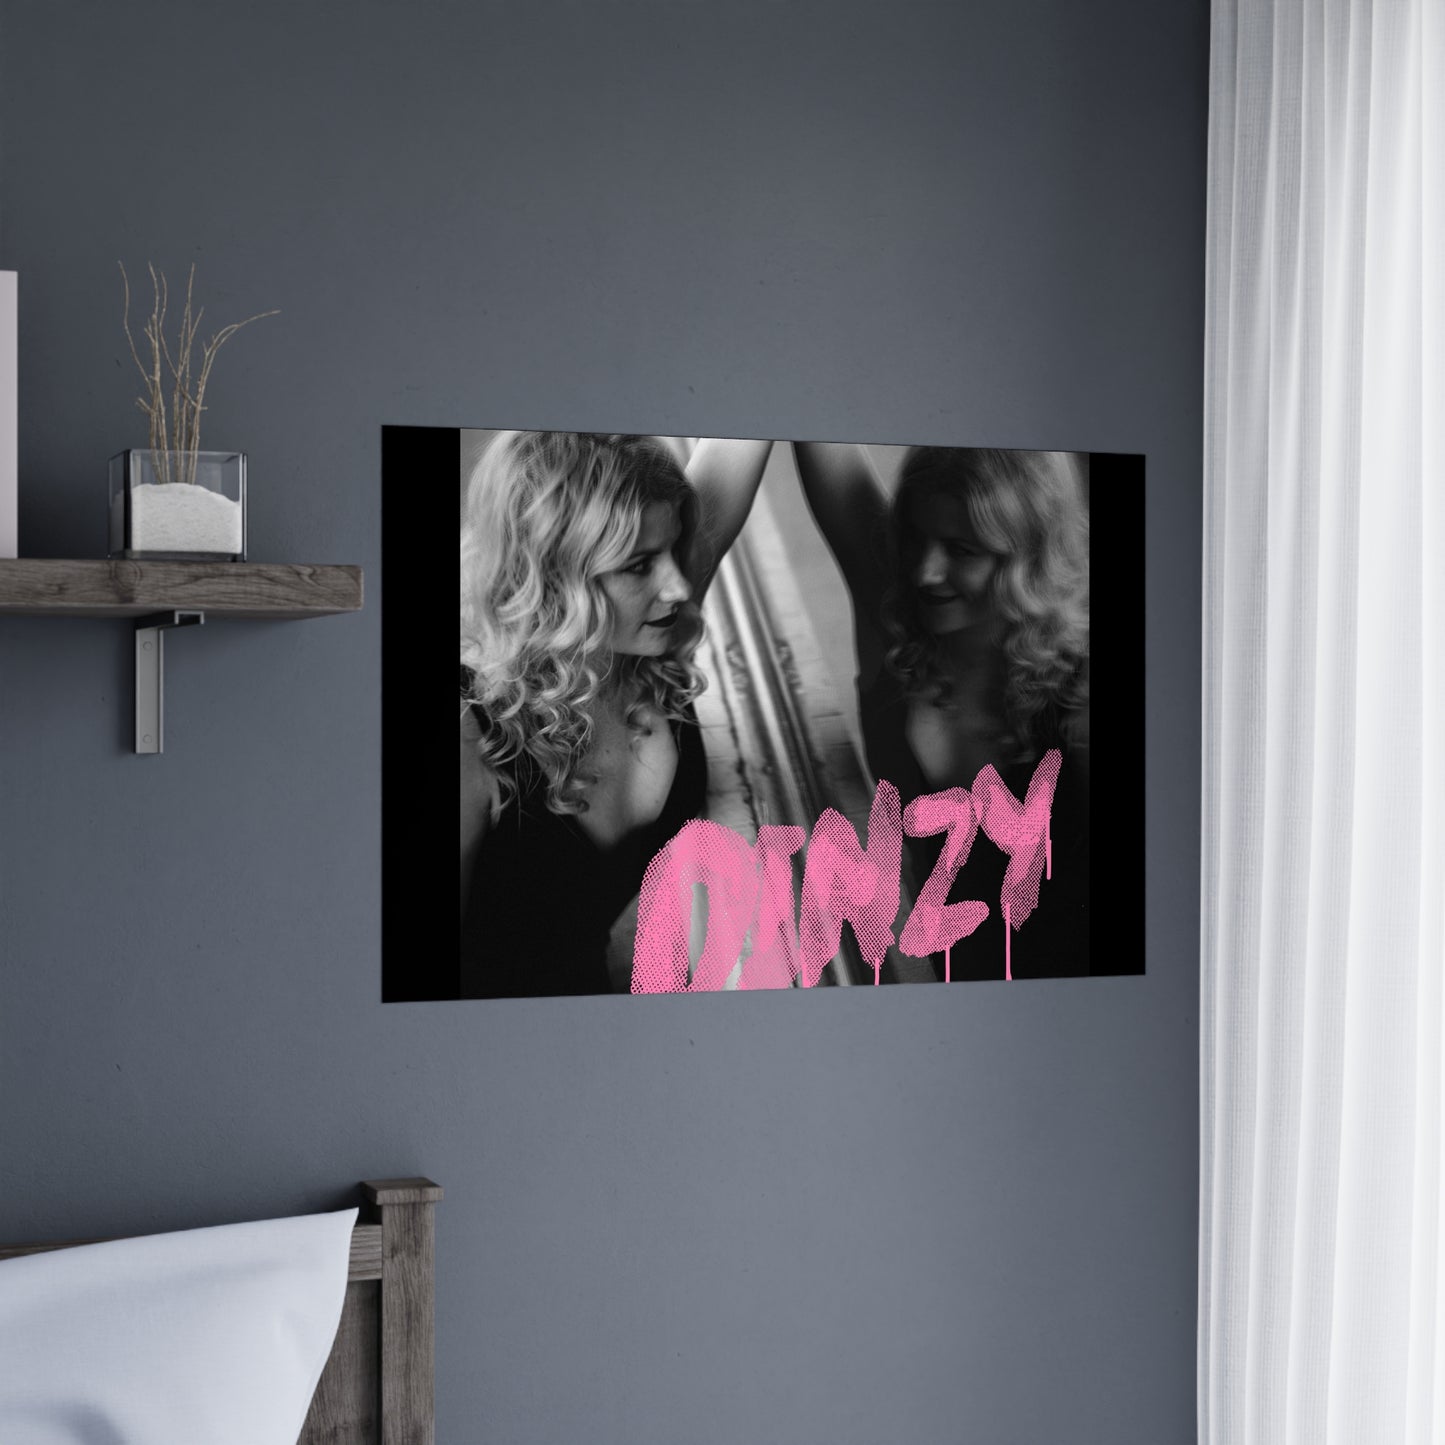 Premium Matte Dinzy-Lie To Yourself-Single Poster